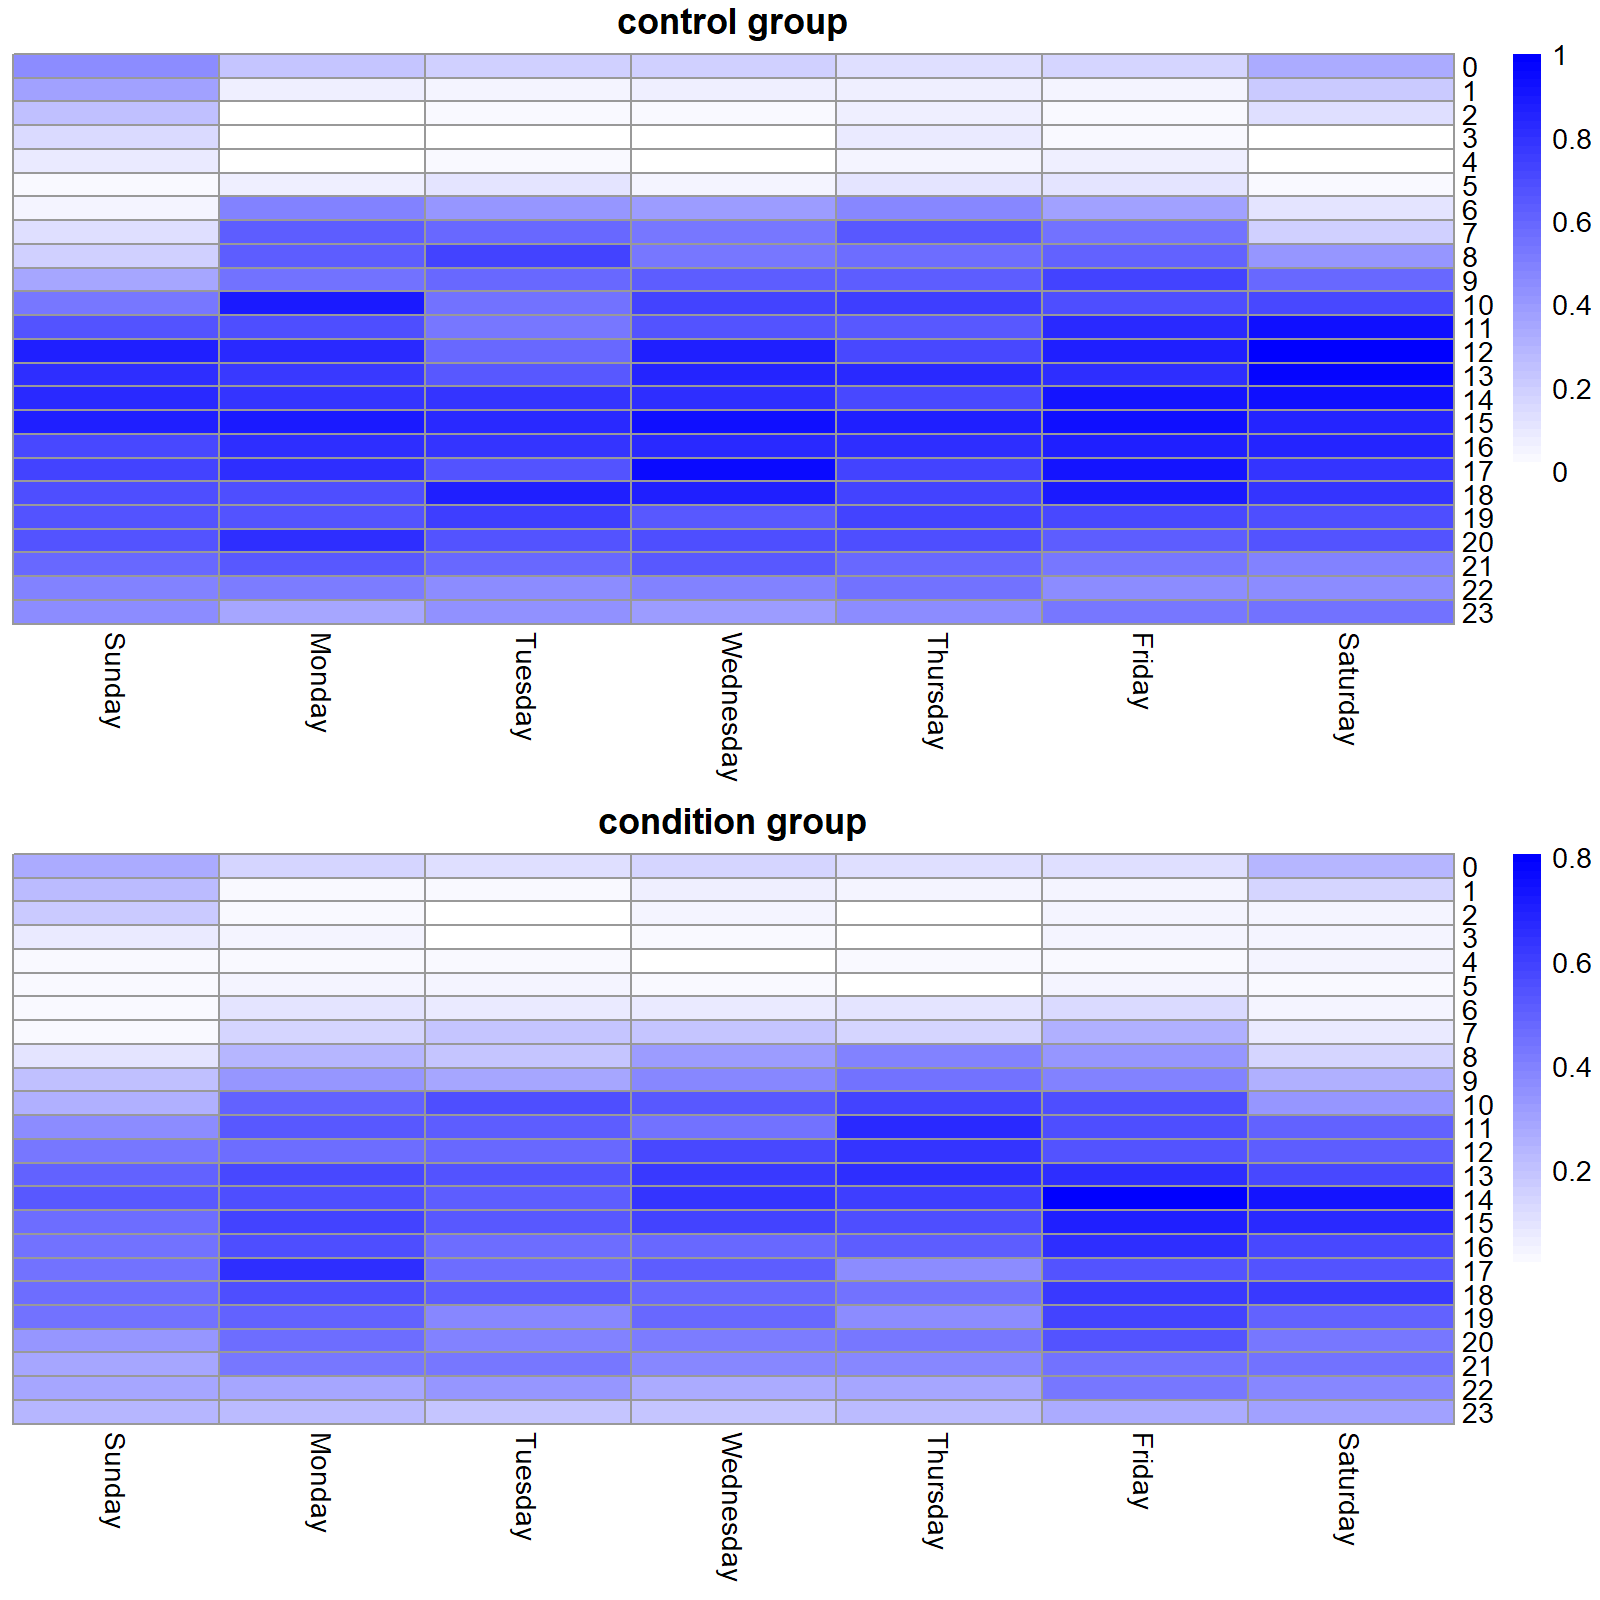 Activity level heatmaps for the control and condition group.